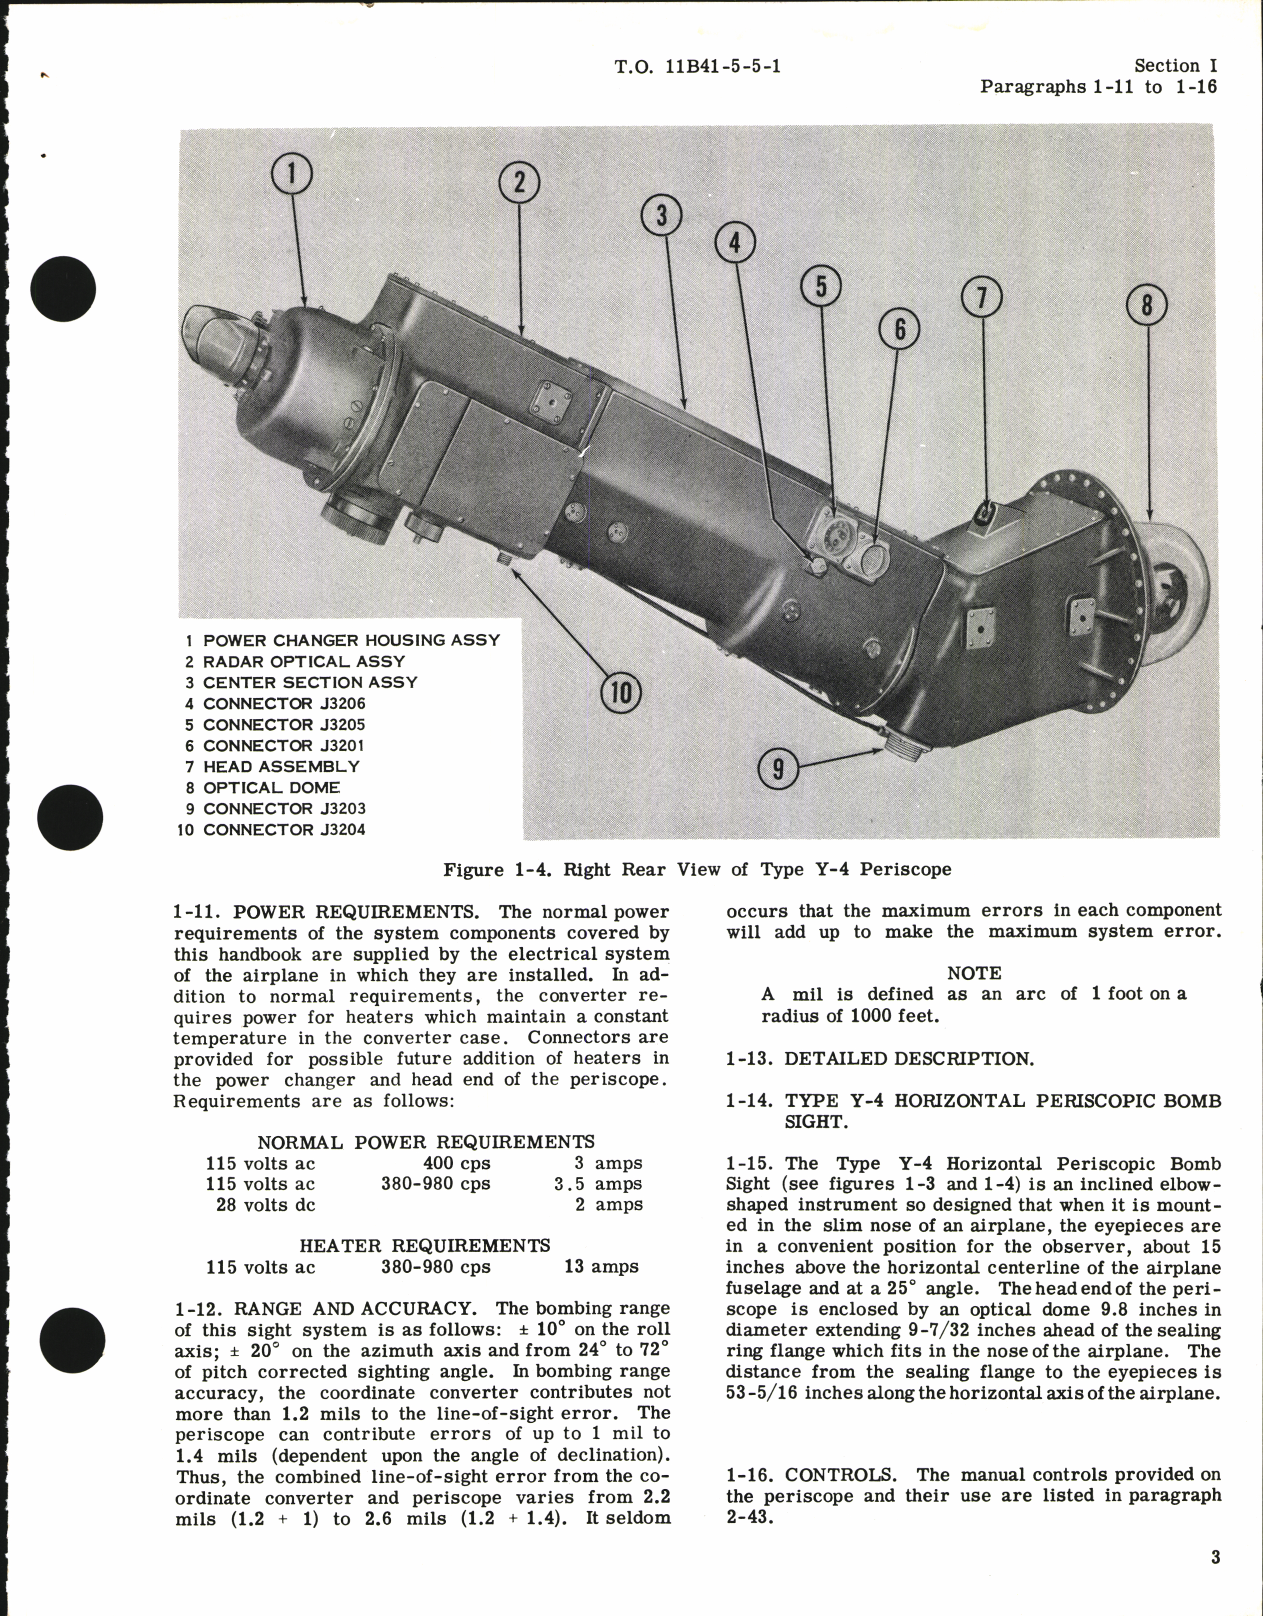 Sample page 7 from AirCorps Library document: Operation and Service Instructions for Type Y-4 Horizontal Periscopic Bombsight